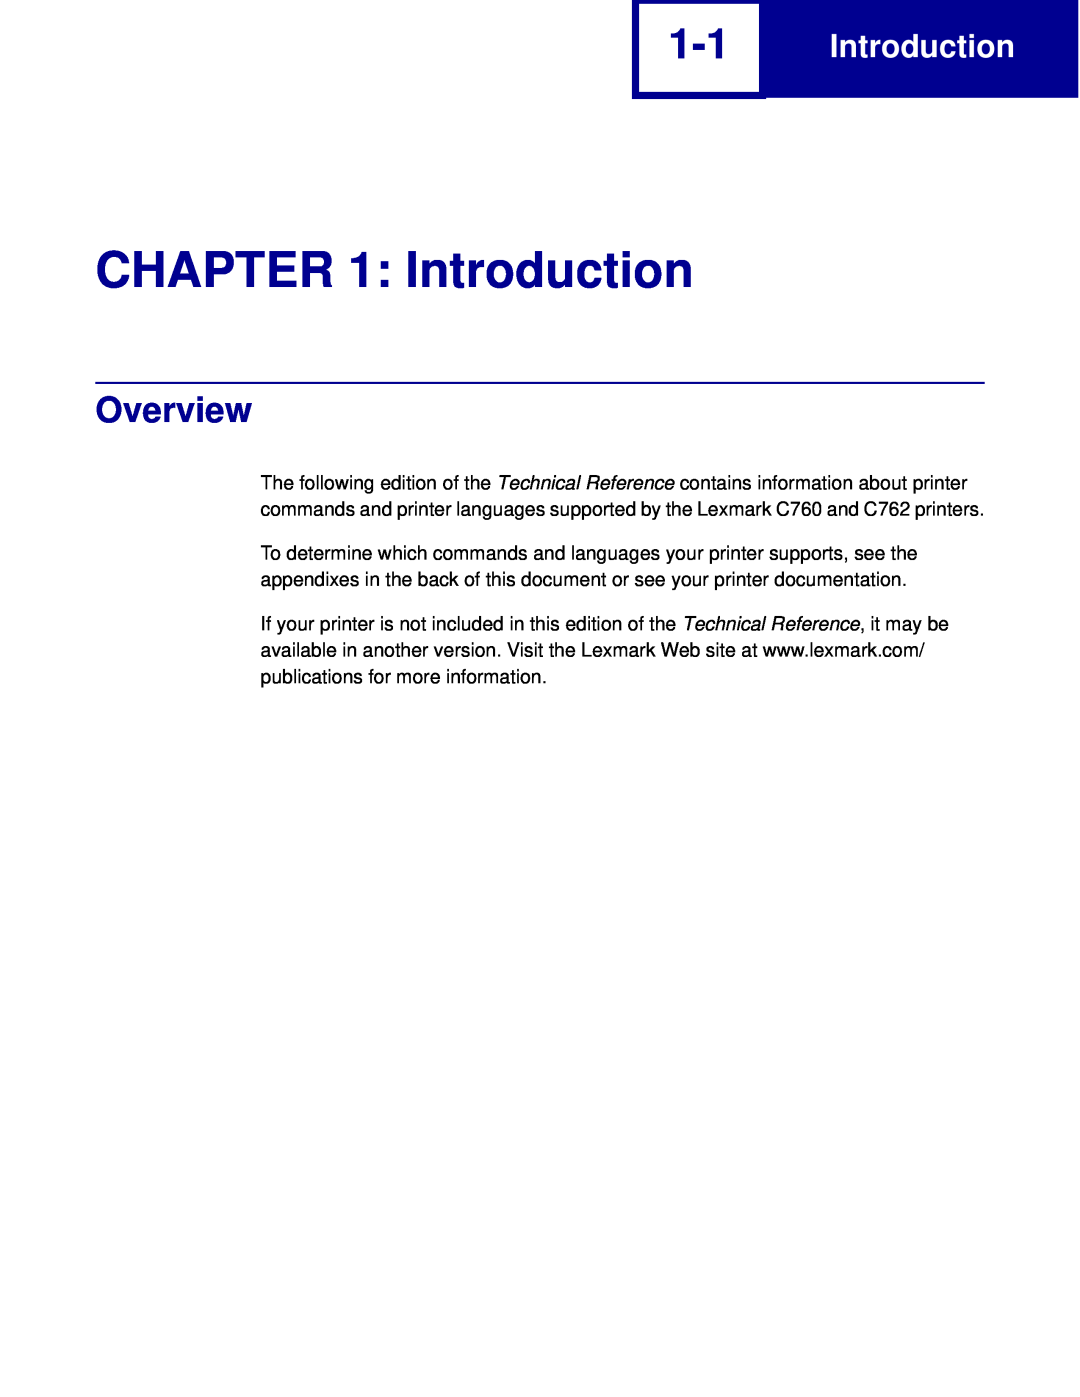 Lexmark C760, C762 manual Introduction, Overview 